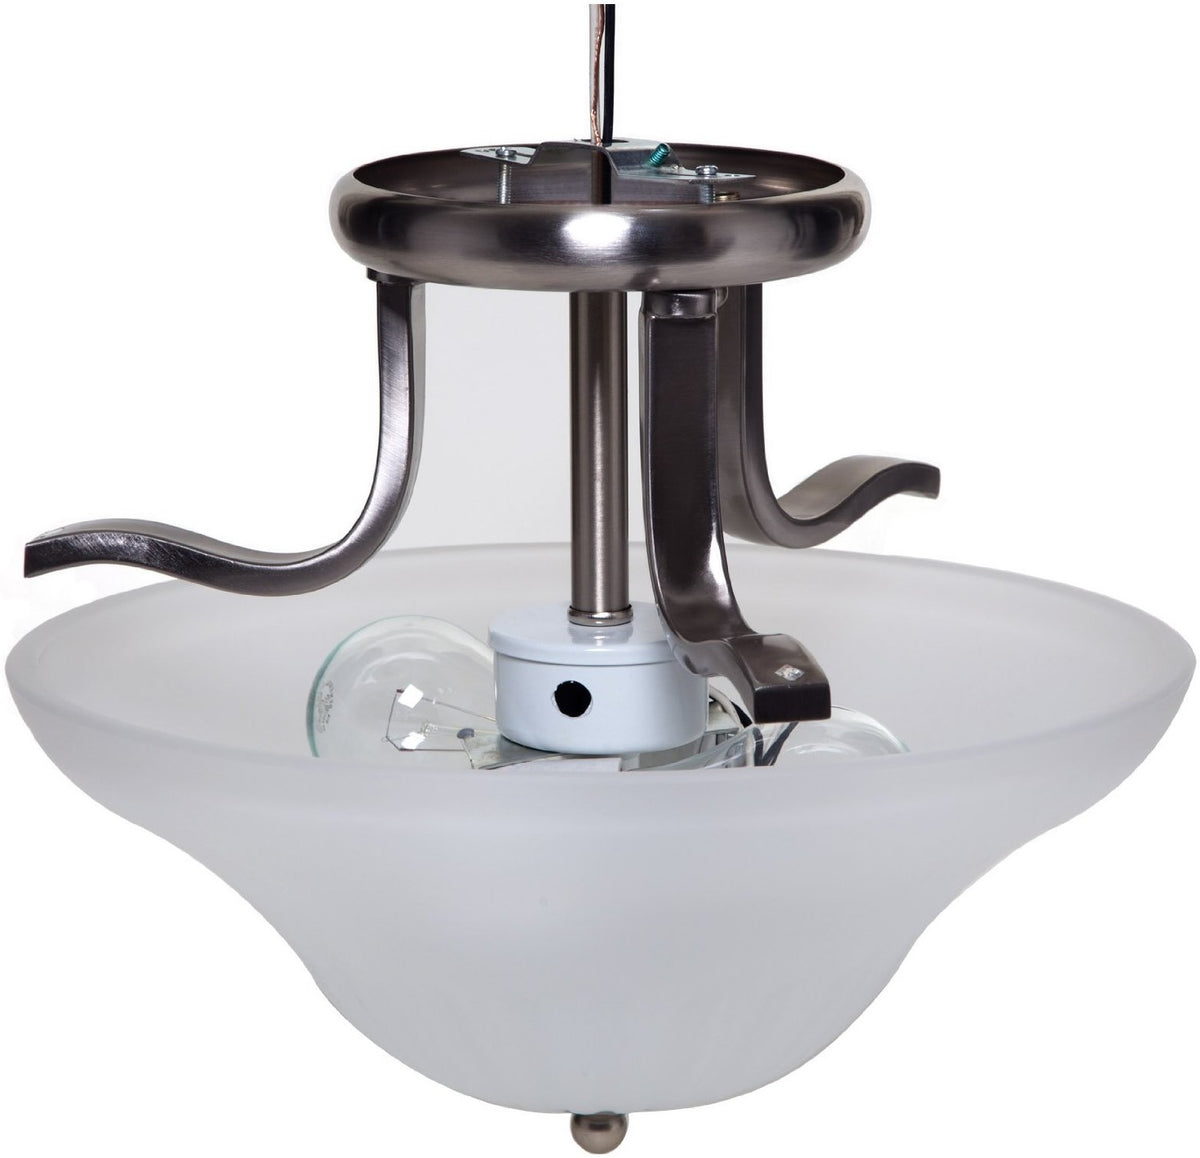 buy ceiling light fixtures at cheap rate in bulk. wholesale & retail lighting replacement parts store. home décor ideas, maintenance, repair replacement parts